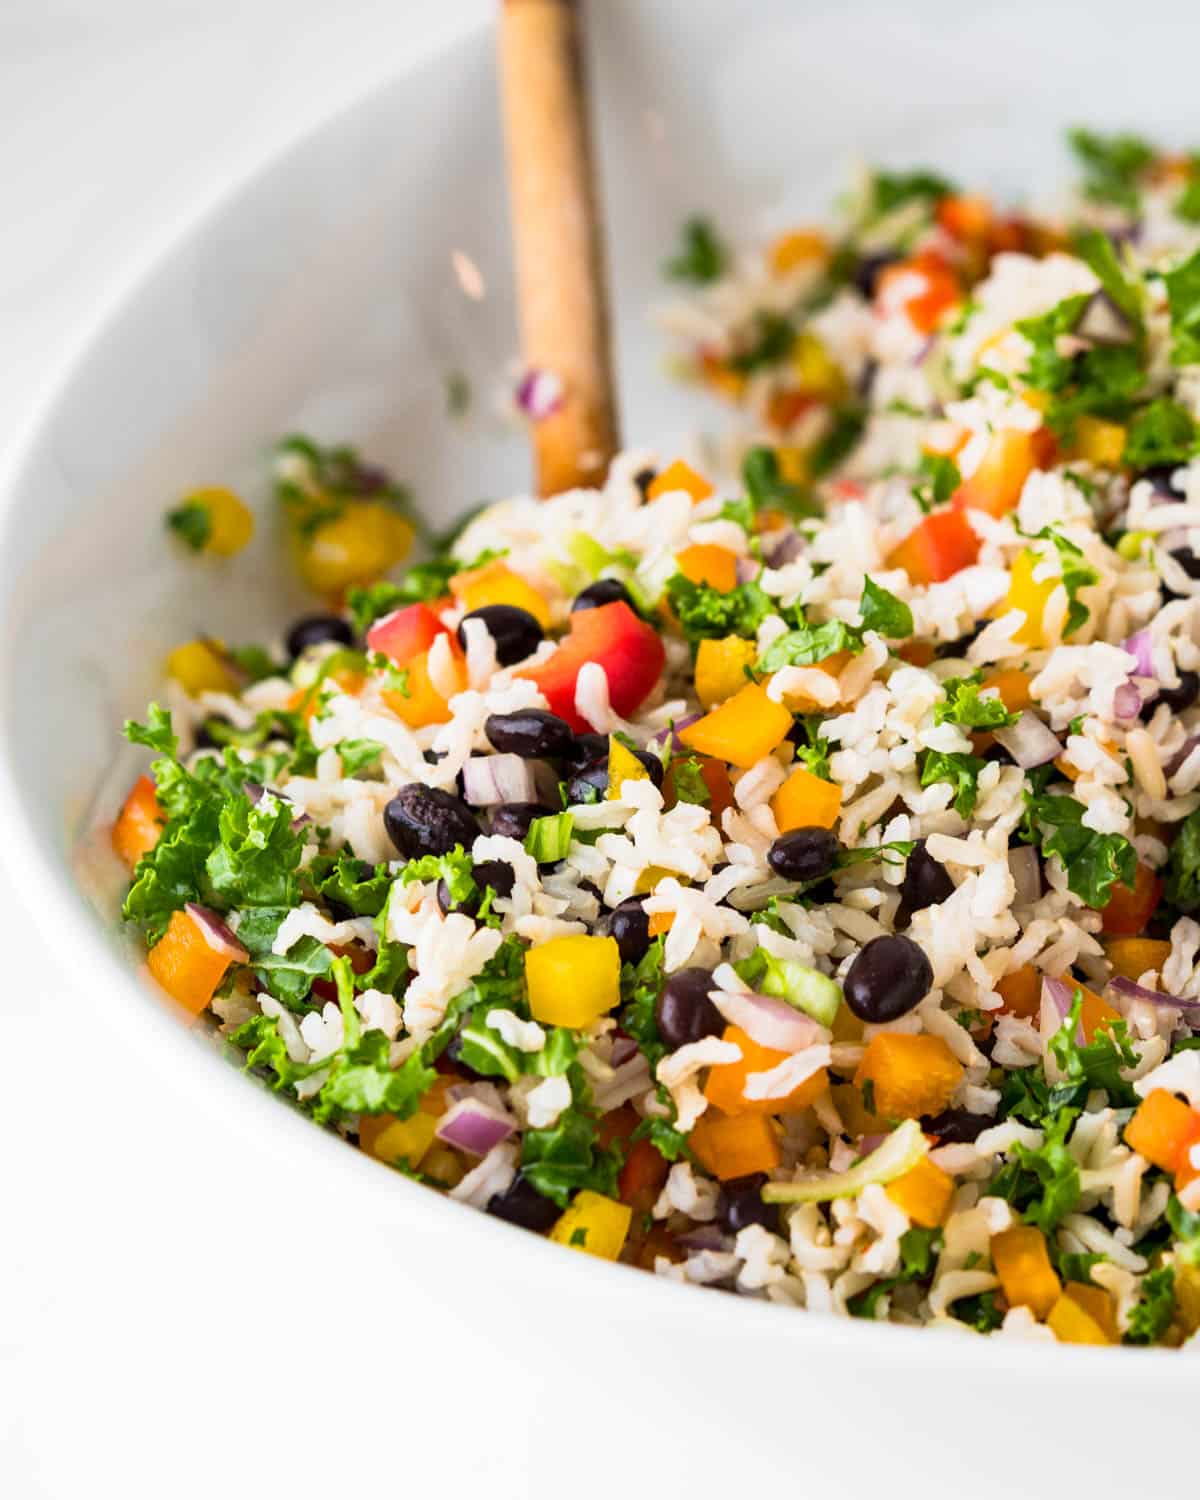 black bean and rice salad in a white bowl with a wooden spoon.